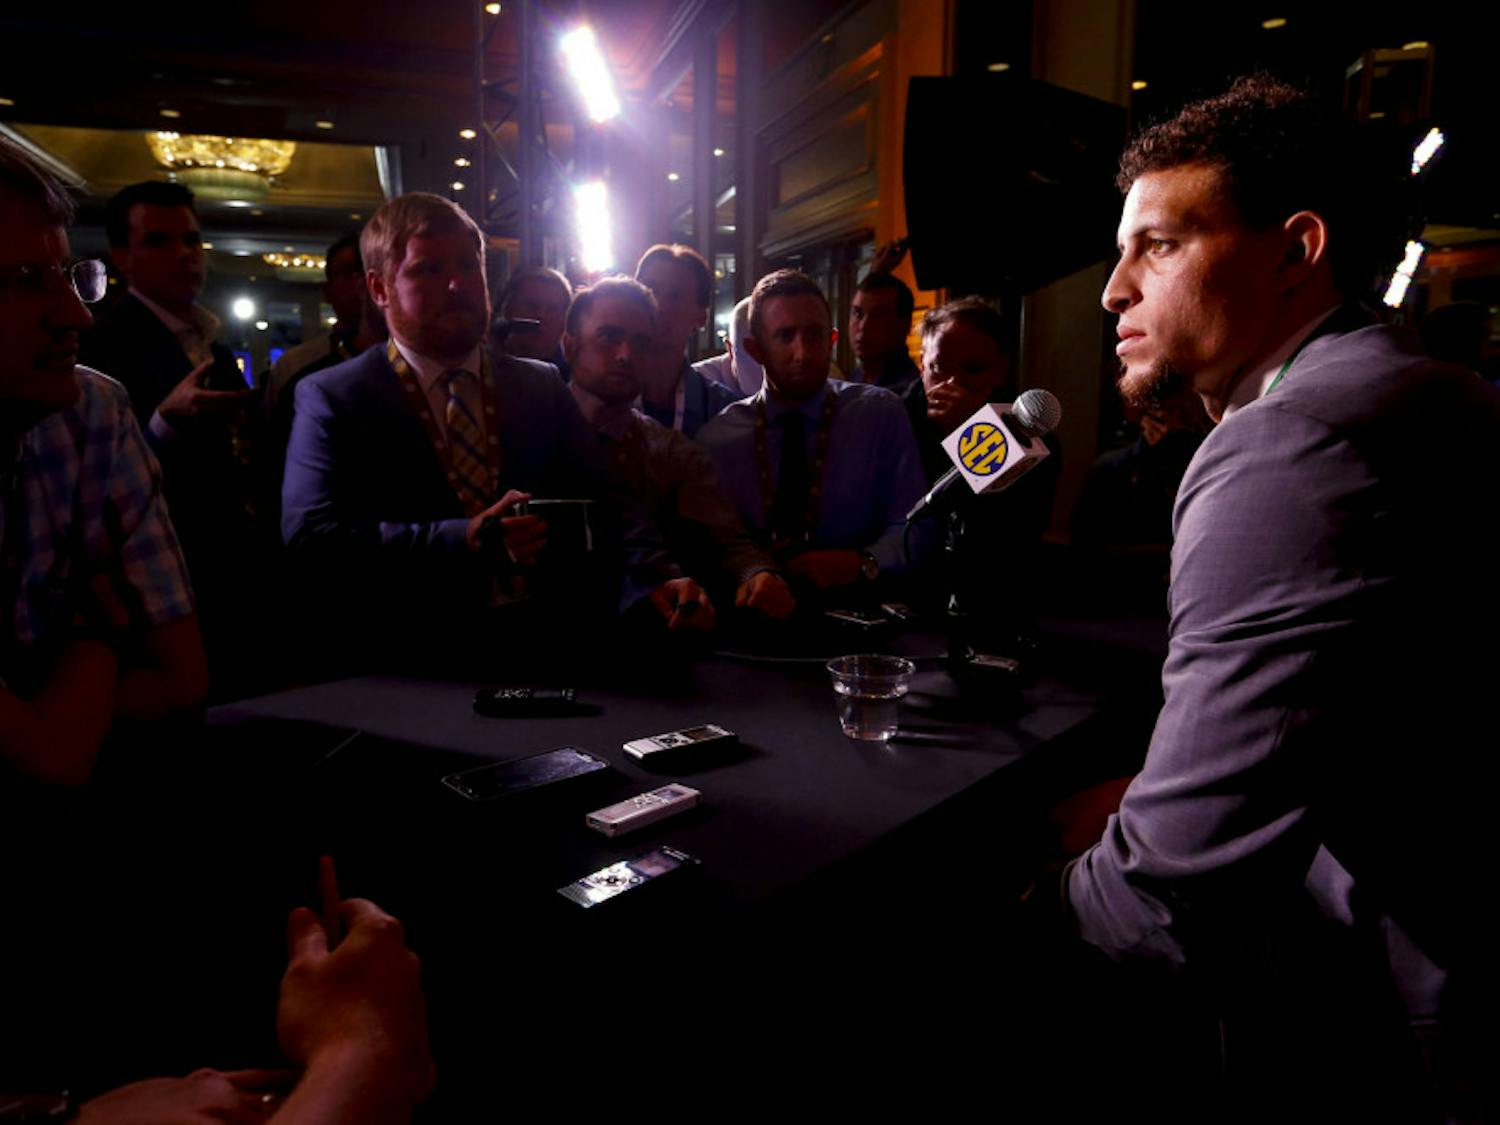 Quarterback Feleipe Franks (pictured), running back Lamical Perine and defensive end Jabari Zuniga were the three UF athletes to appear at the SEC Media Days on Monday alongside coach Dan Mullen.